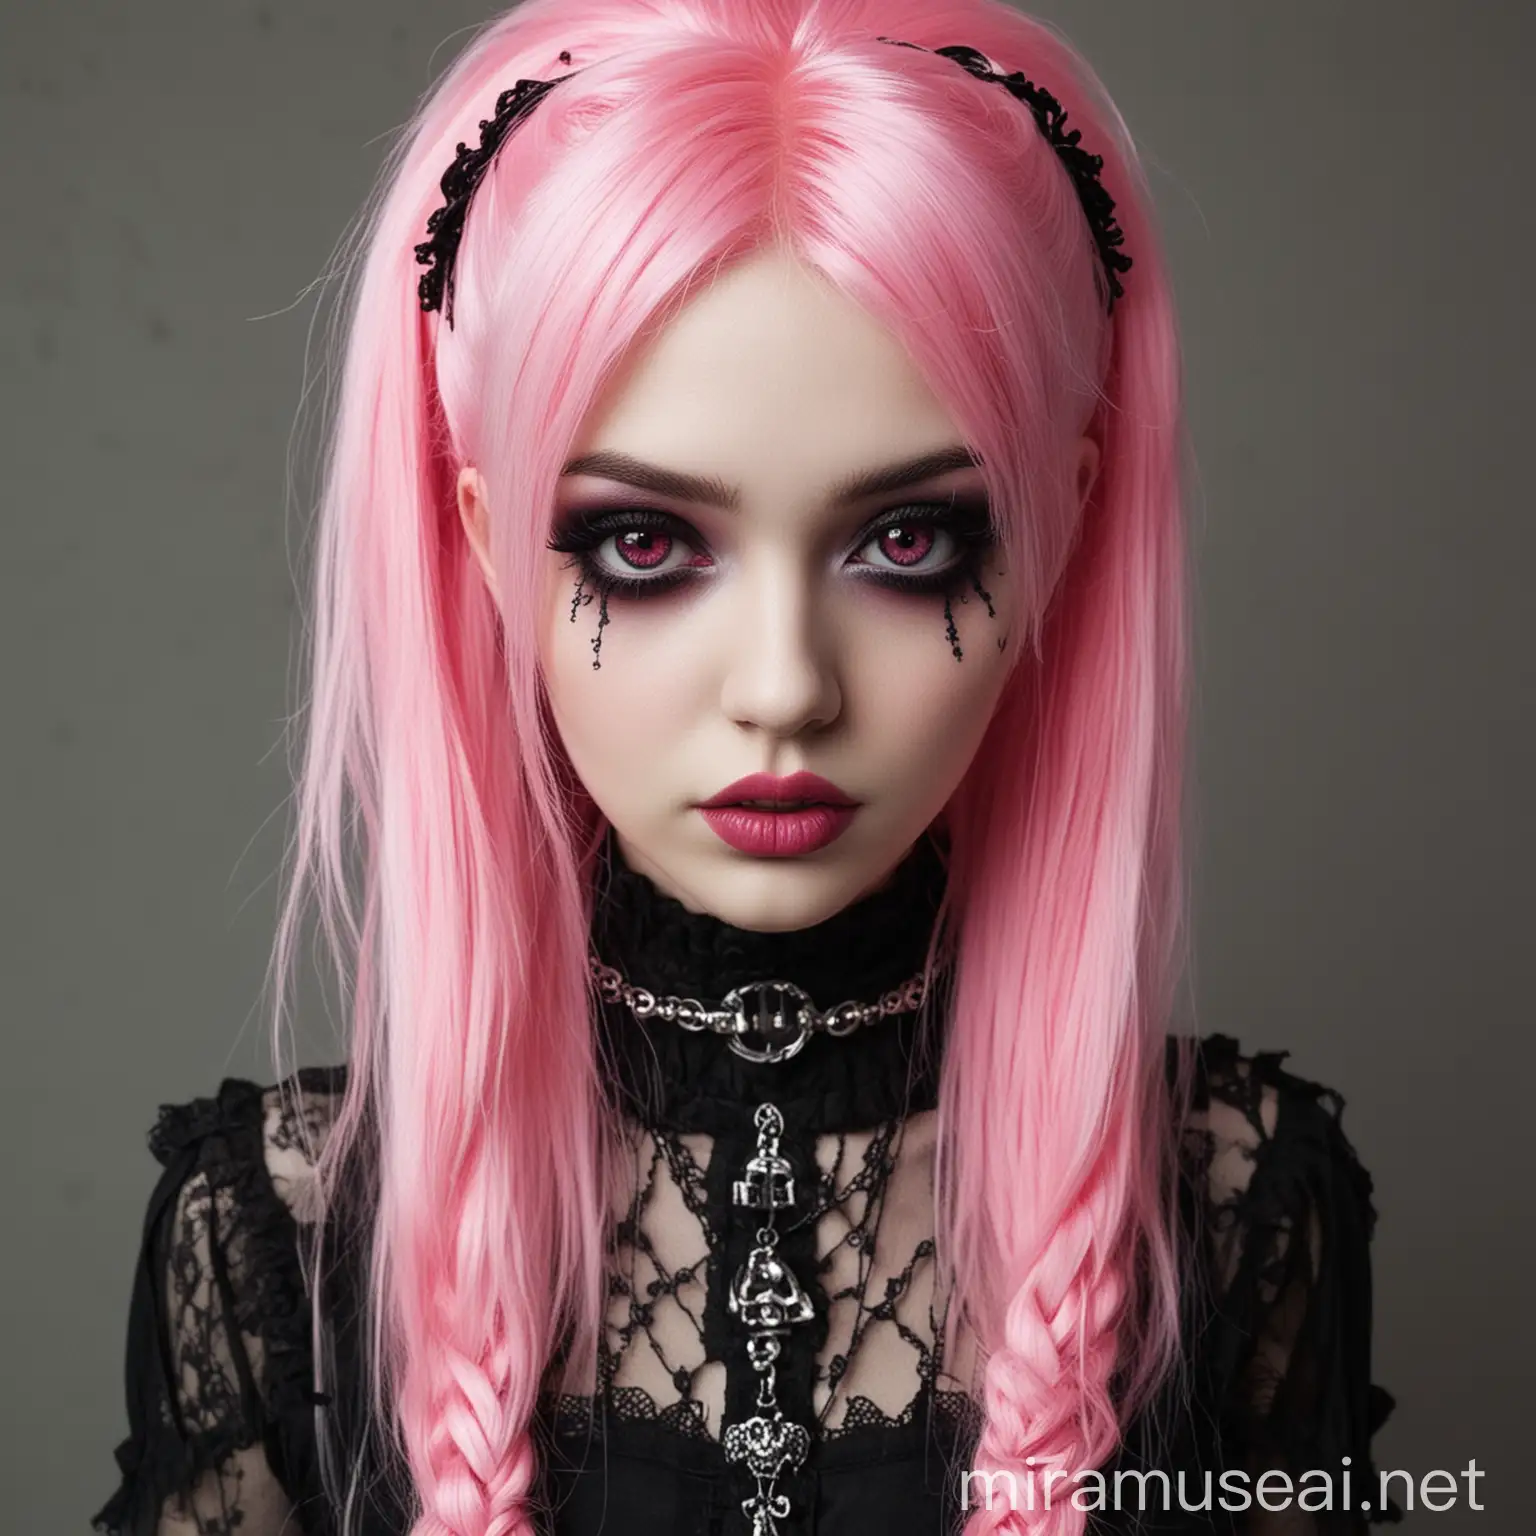 Goth Girl in Pink Theme Dark Fashion with a Pop of Color